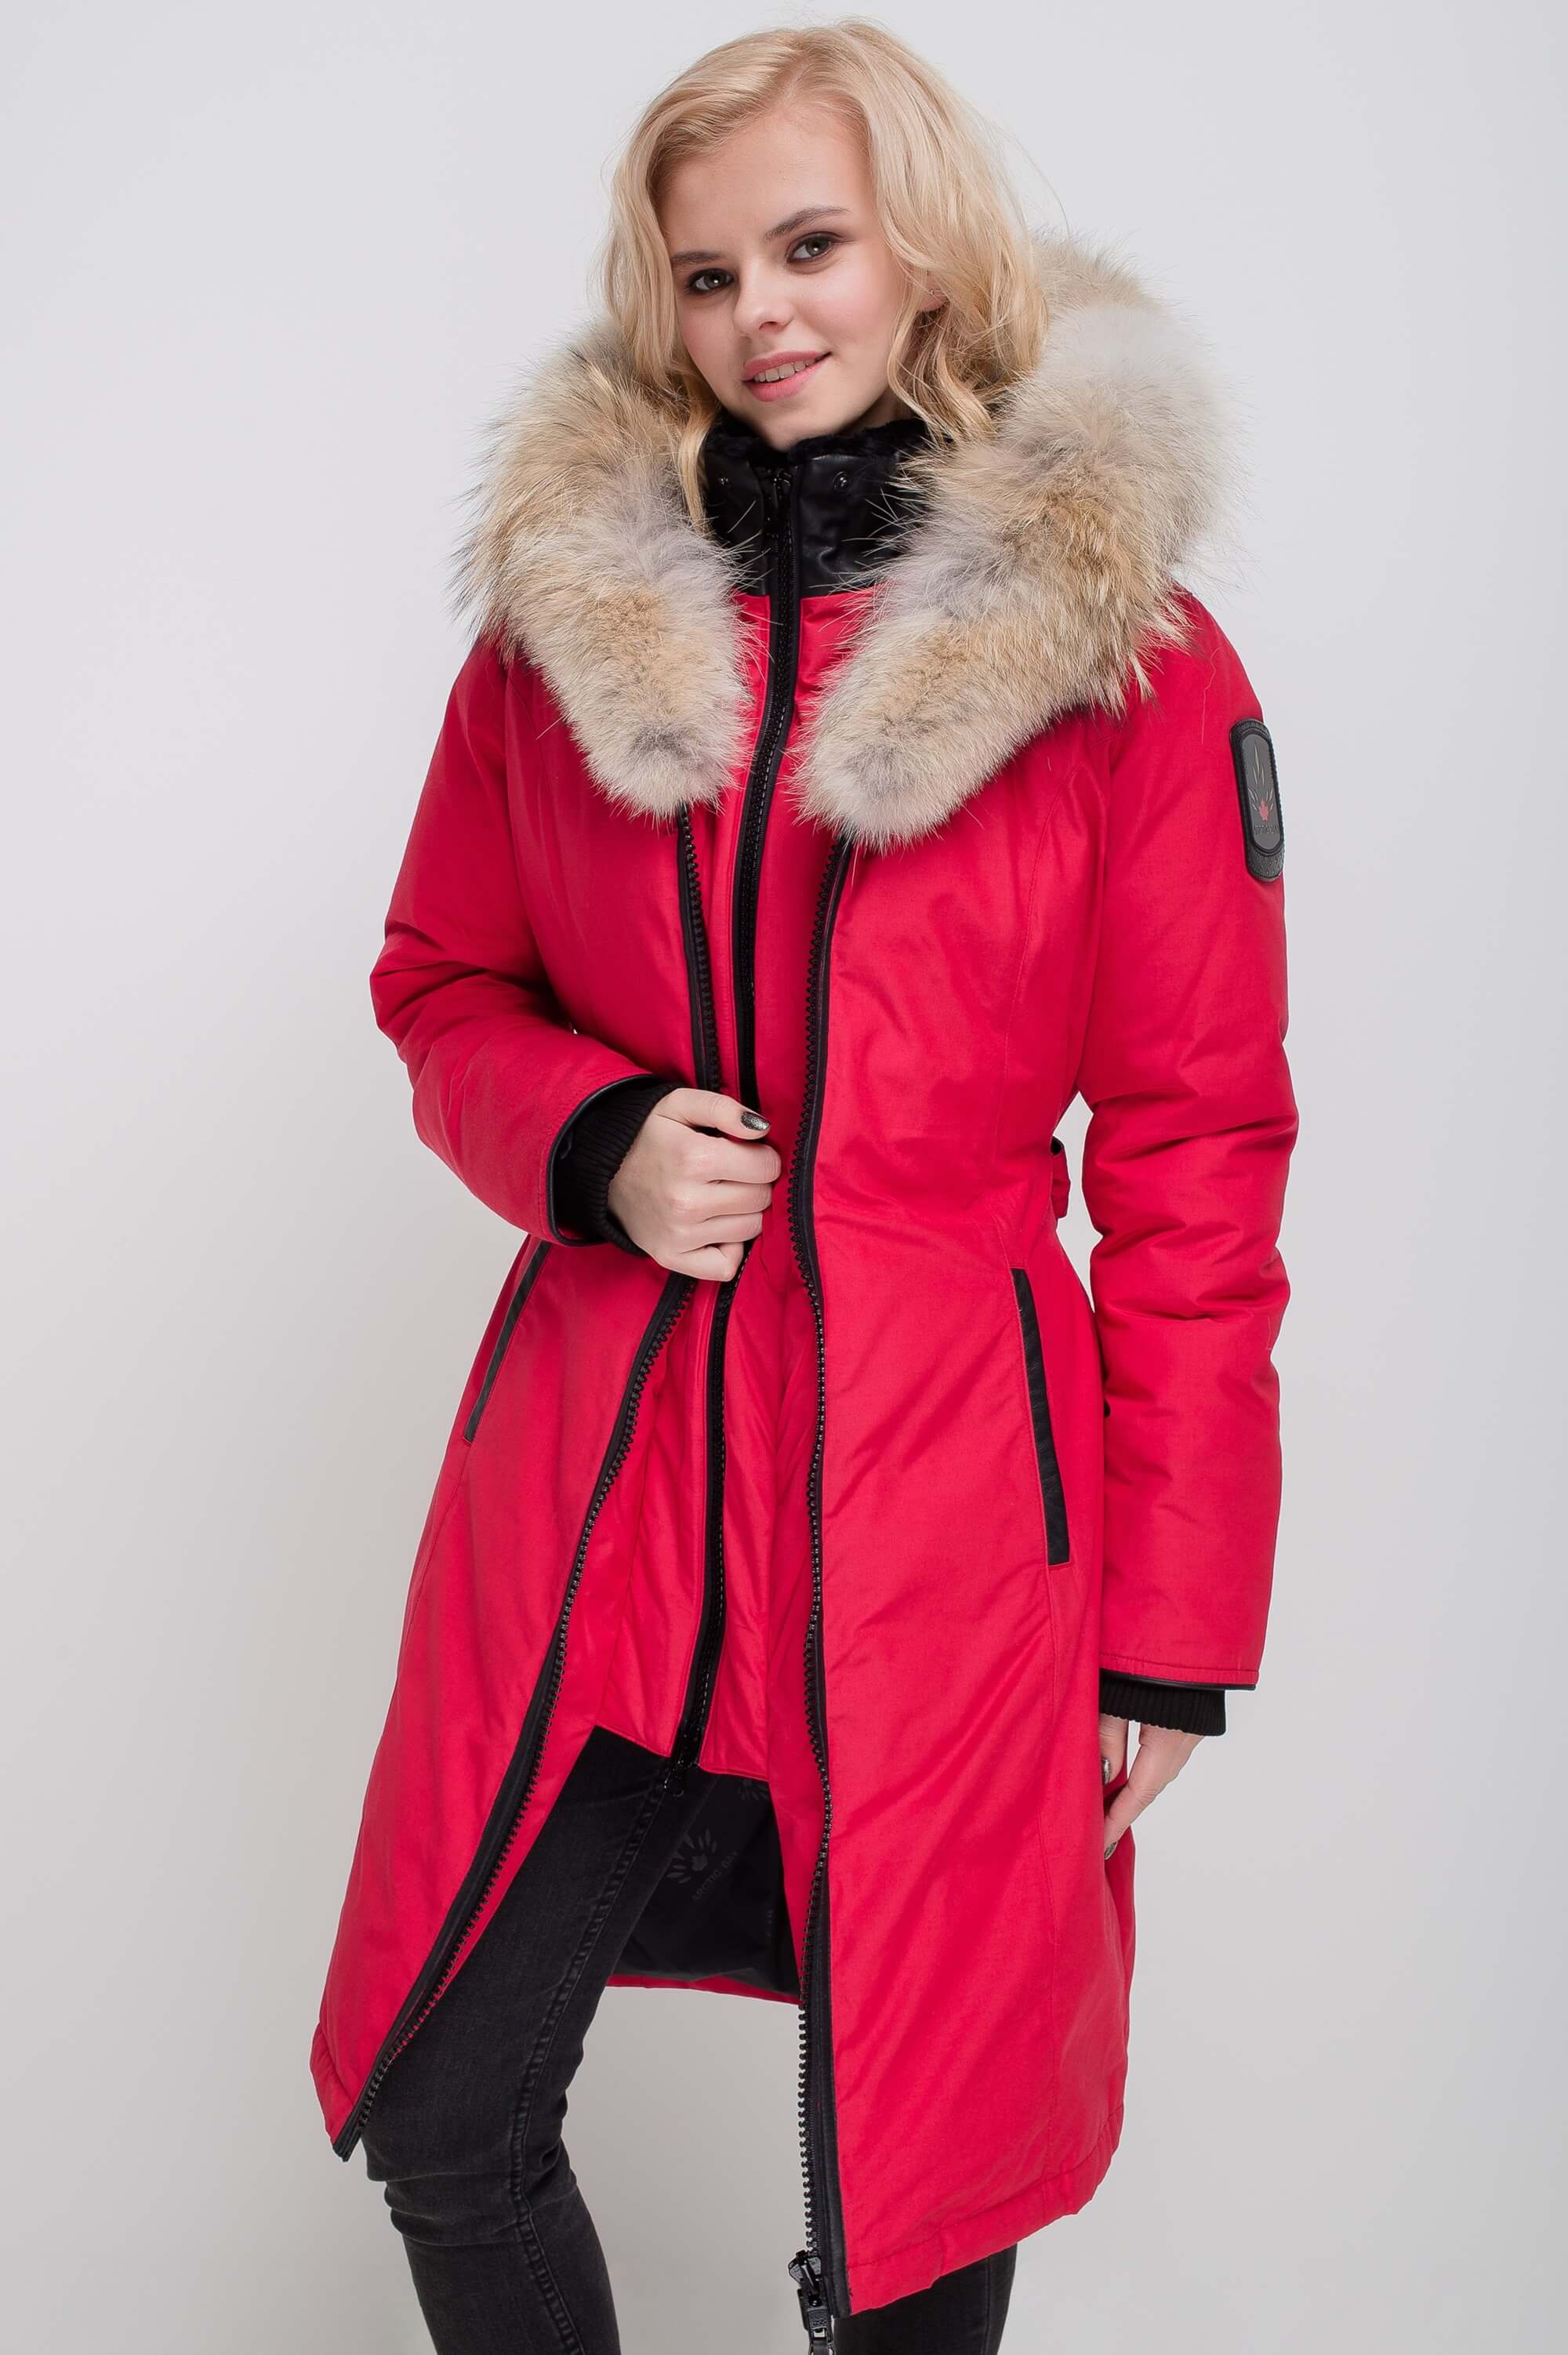 Canadian Made Arctic, Winter Parkas, Coats, Jackets, and Accessories